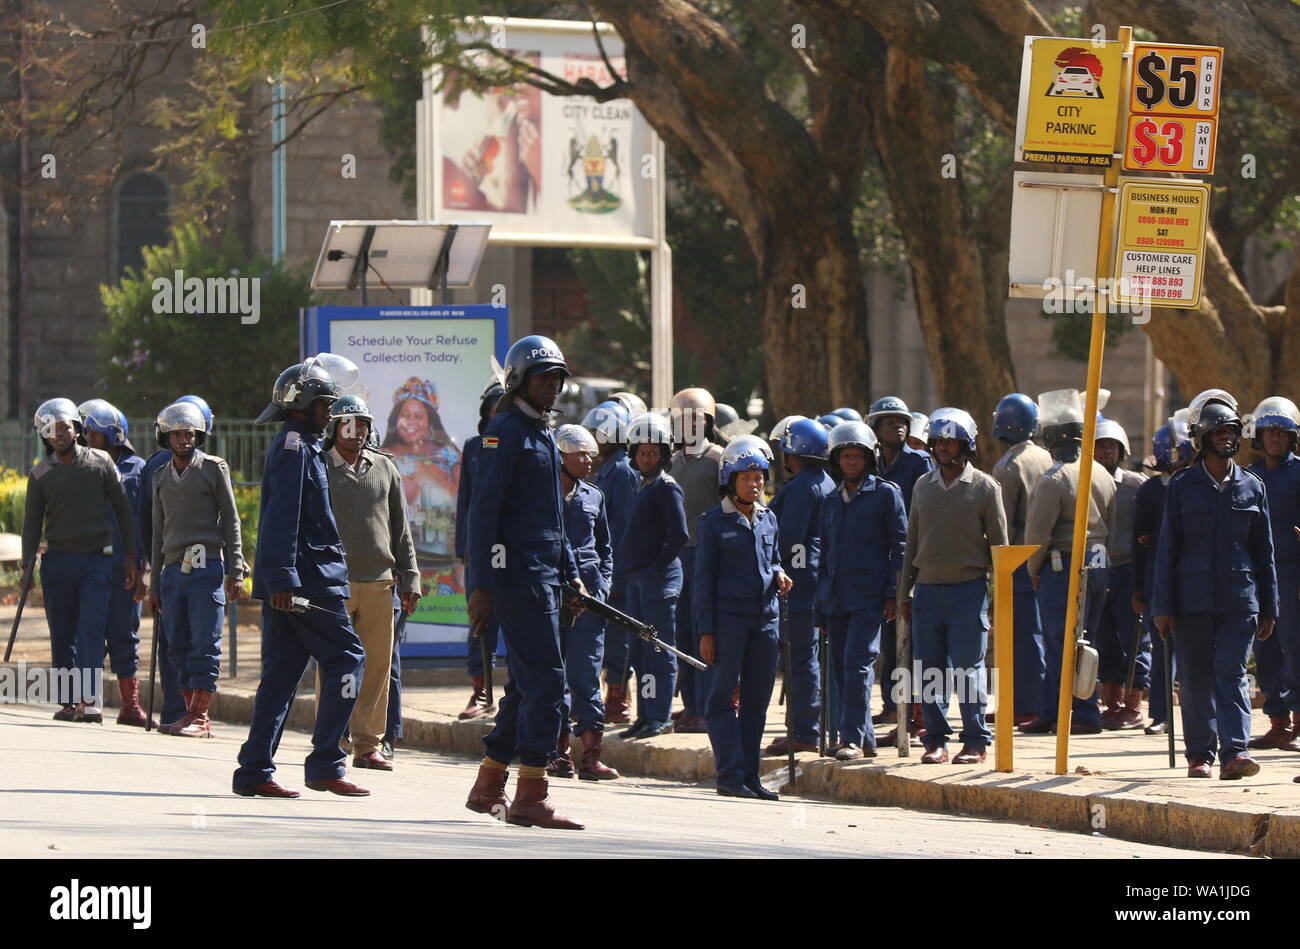 Harare, Zimbabwe. 16th Aug, 2019. Police officers stand guard in Harare, Zimbabwe, on Aug. 16, 2019. Shops, banks and retail outlets in Zimbabwe's capital Harare were closed on Friday after the High Court banned a planned demonstration by the opposition MDC Alliance. Heavily armed police officers patrolled the central business district while some were stationed at strategic areas in the city center, including at Africa Unity Square where protesters were due to congregate. Credit: Shaun Jusa/Xinhua Credit: Xinhua/Alamy Live News Stock Photo